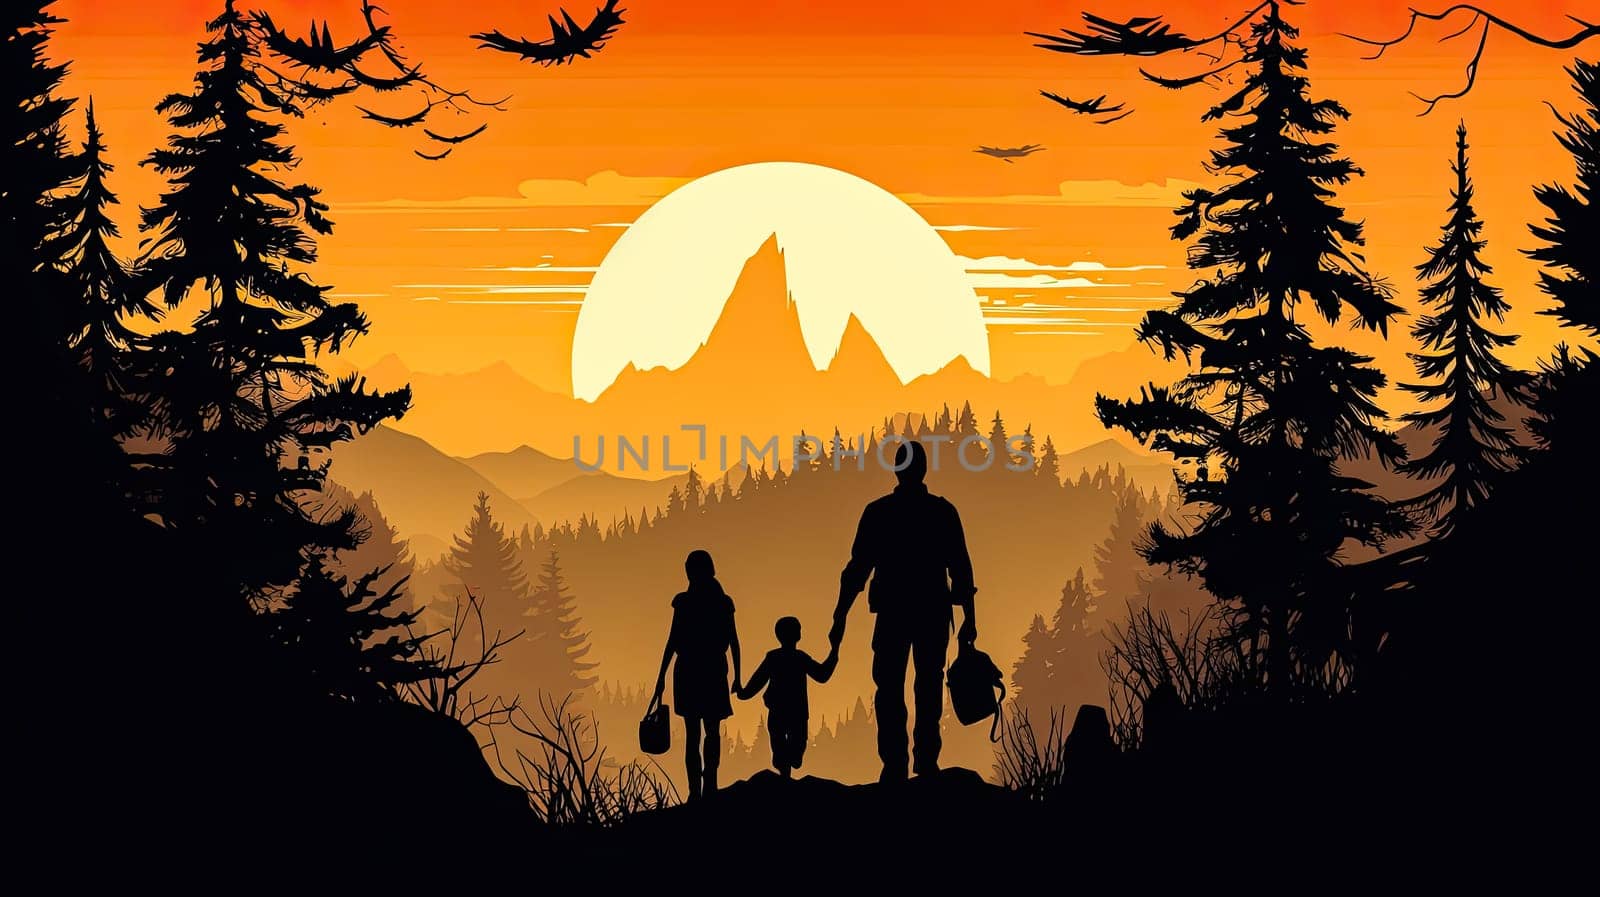 illustration of a father holding his child's hand against a mountainous backdrop by Alla_Morozova93